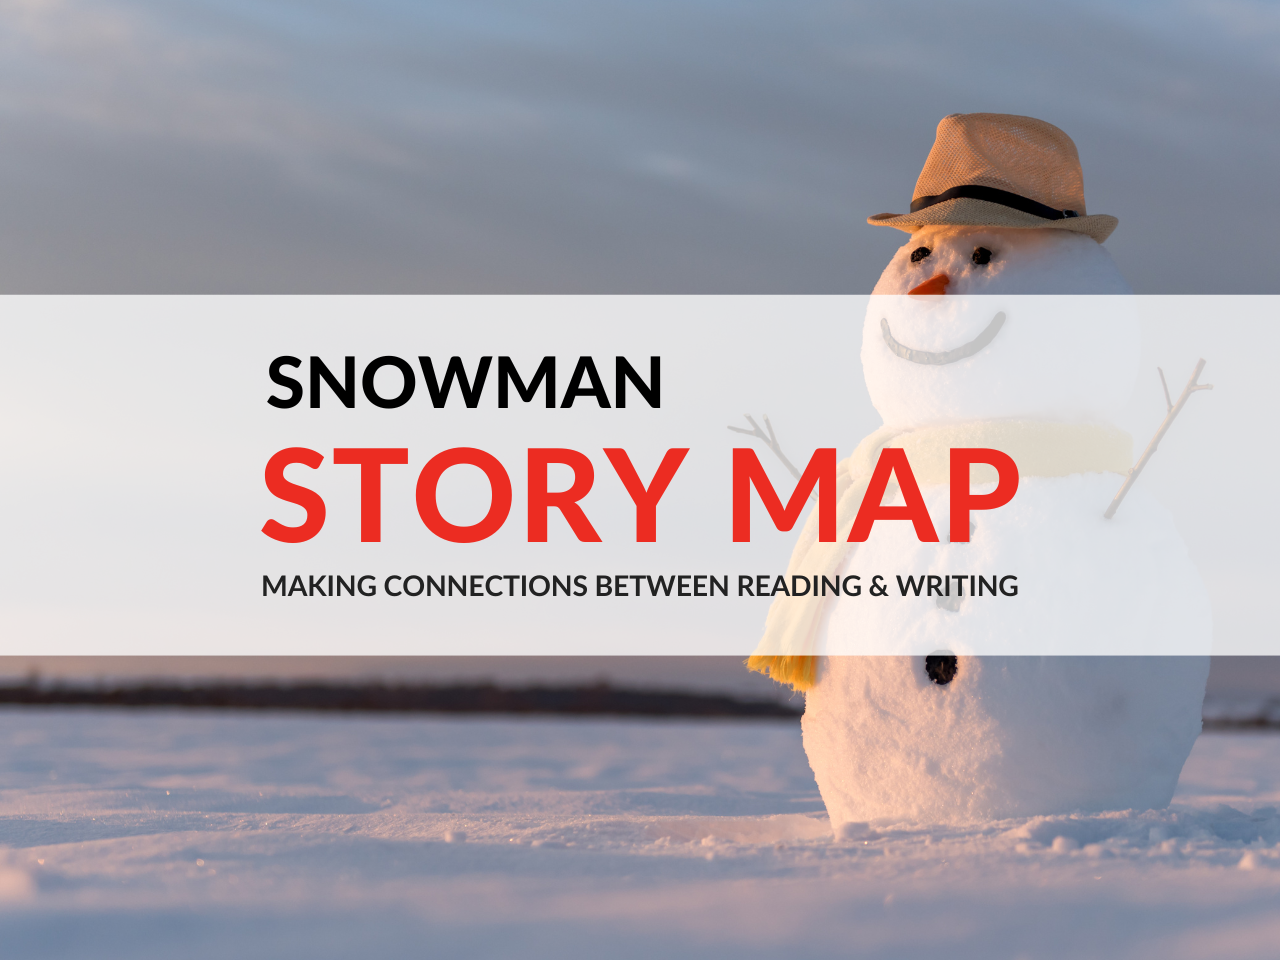 snowman-story-map-making-connections-between-reading-and-writing